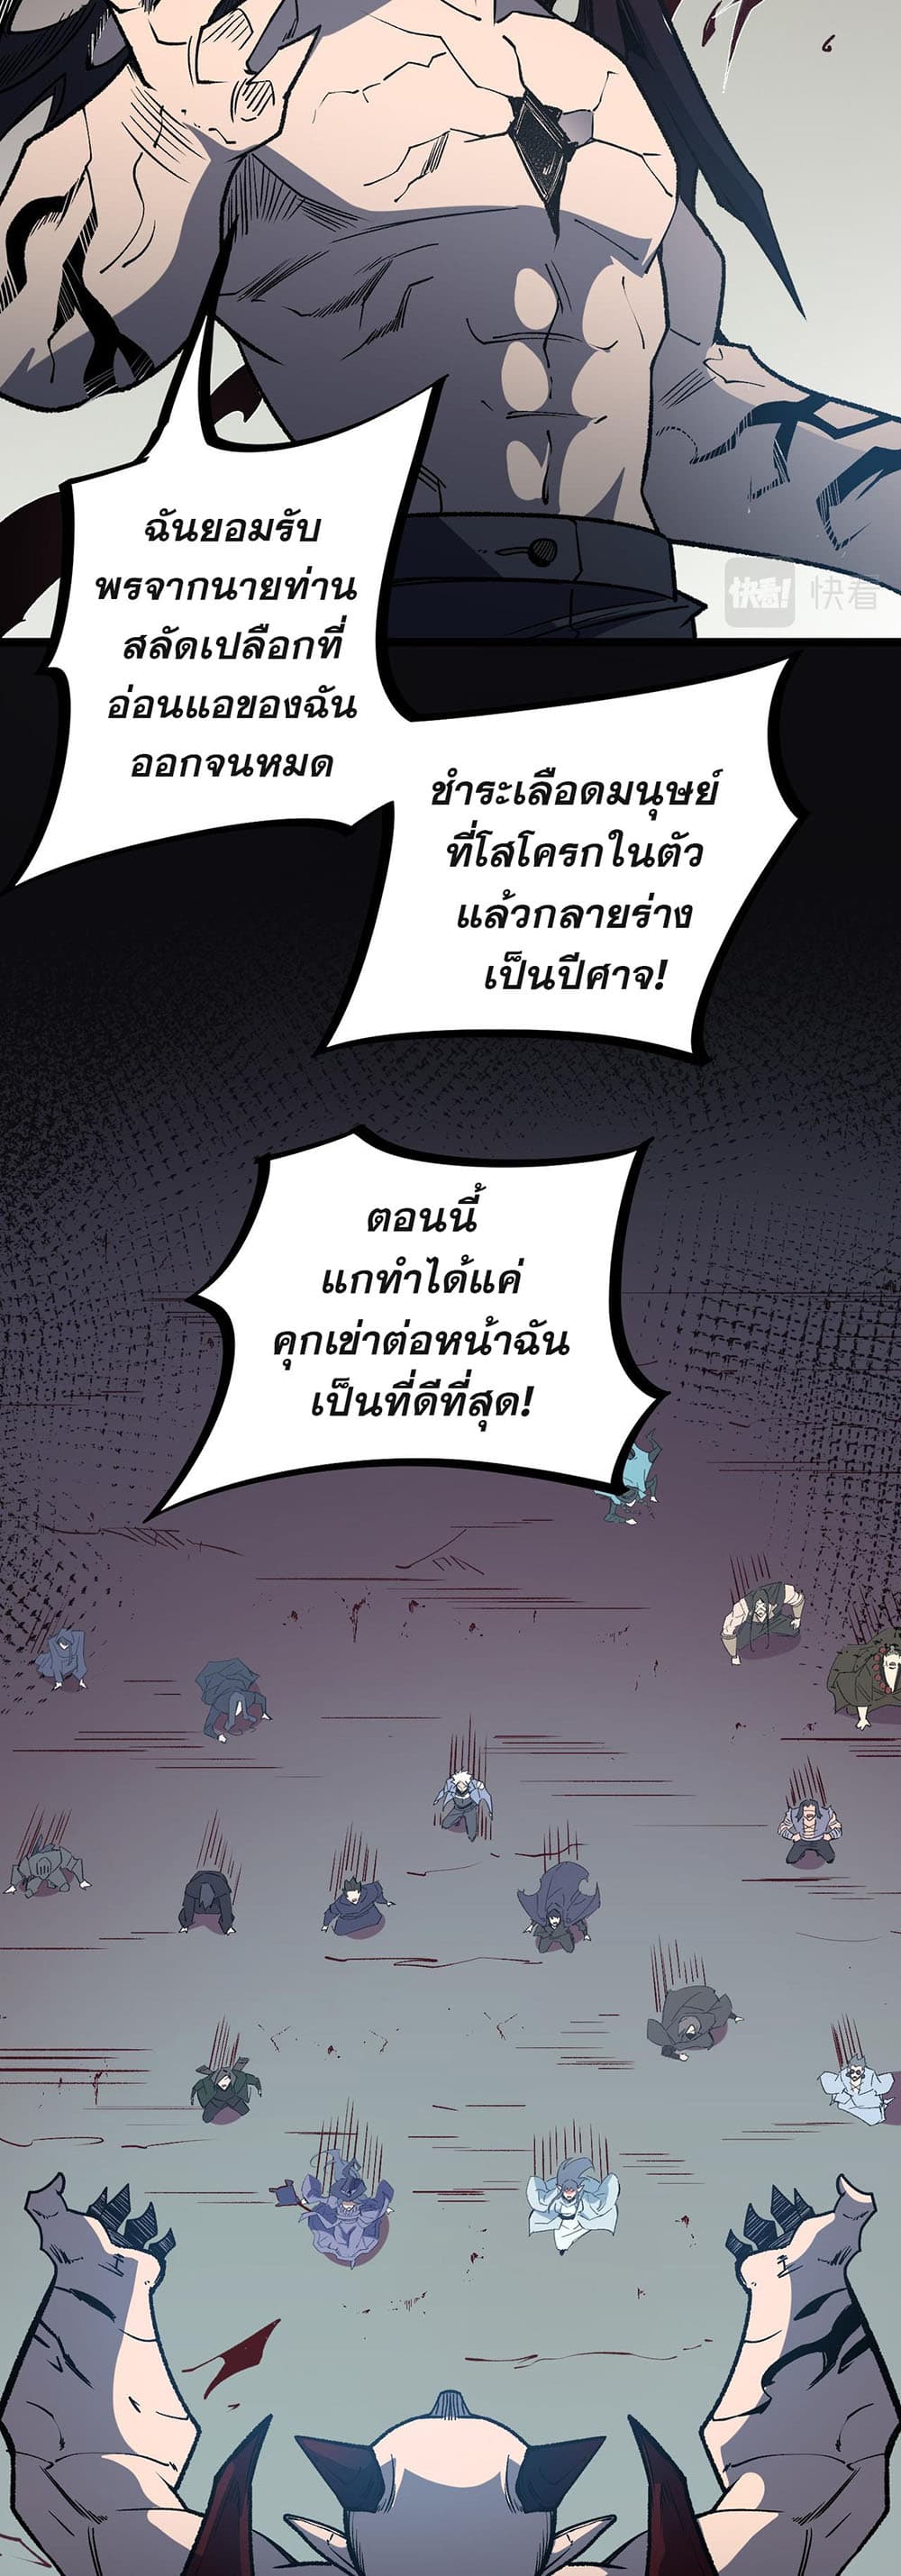 Job Changing for the Entire Population: The Jobless Me Will Terminate the Gods ฉันคือผู้เล่นไร้อาชีพที่สังหารเหล่าเทพ 52-52